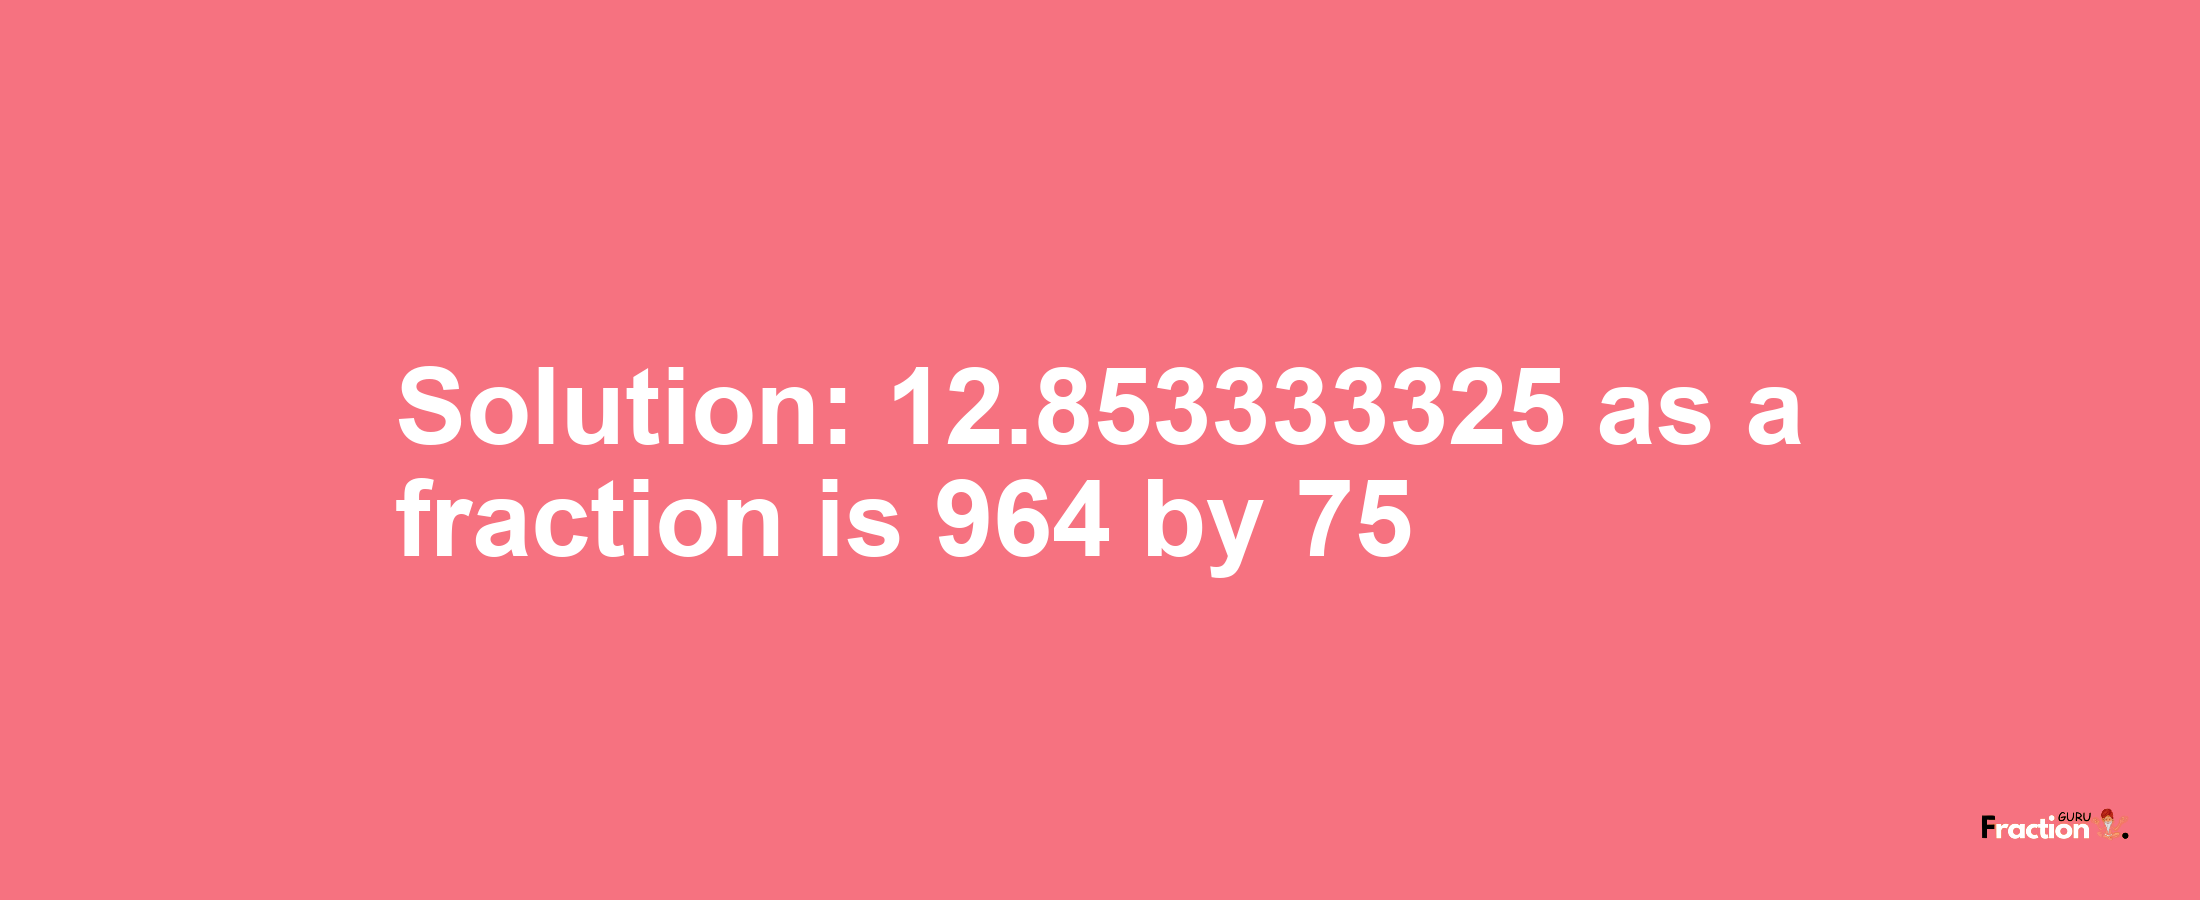 Solution:12.853333325 as a fraction is 964/75